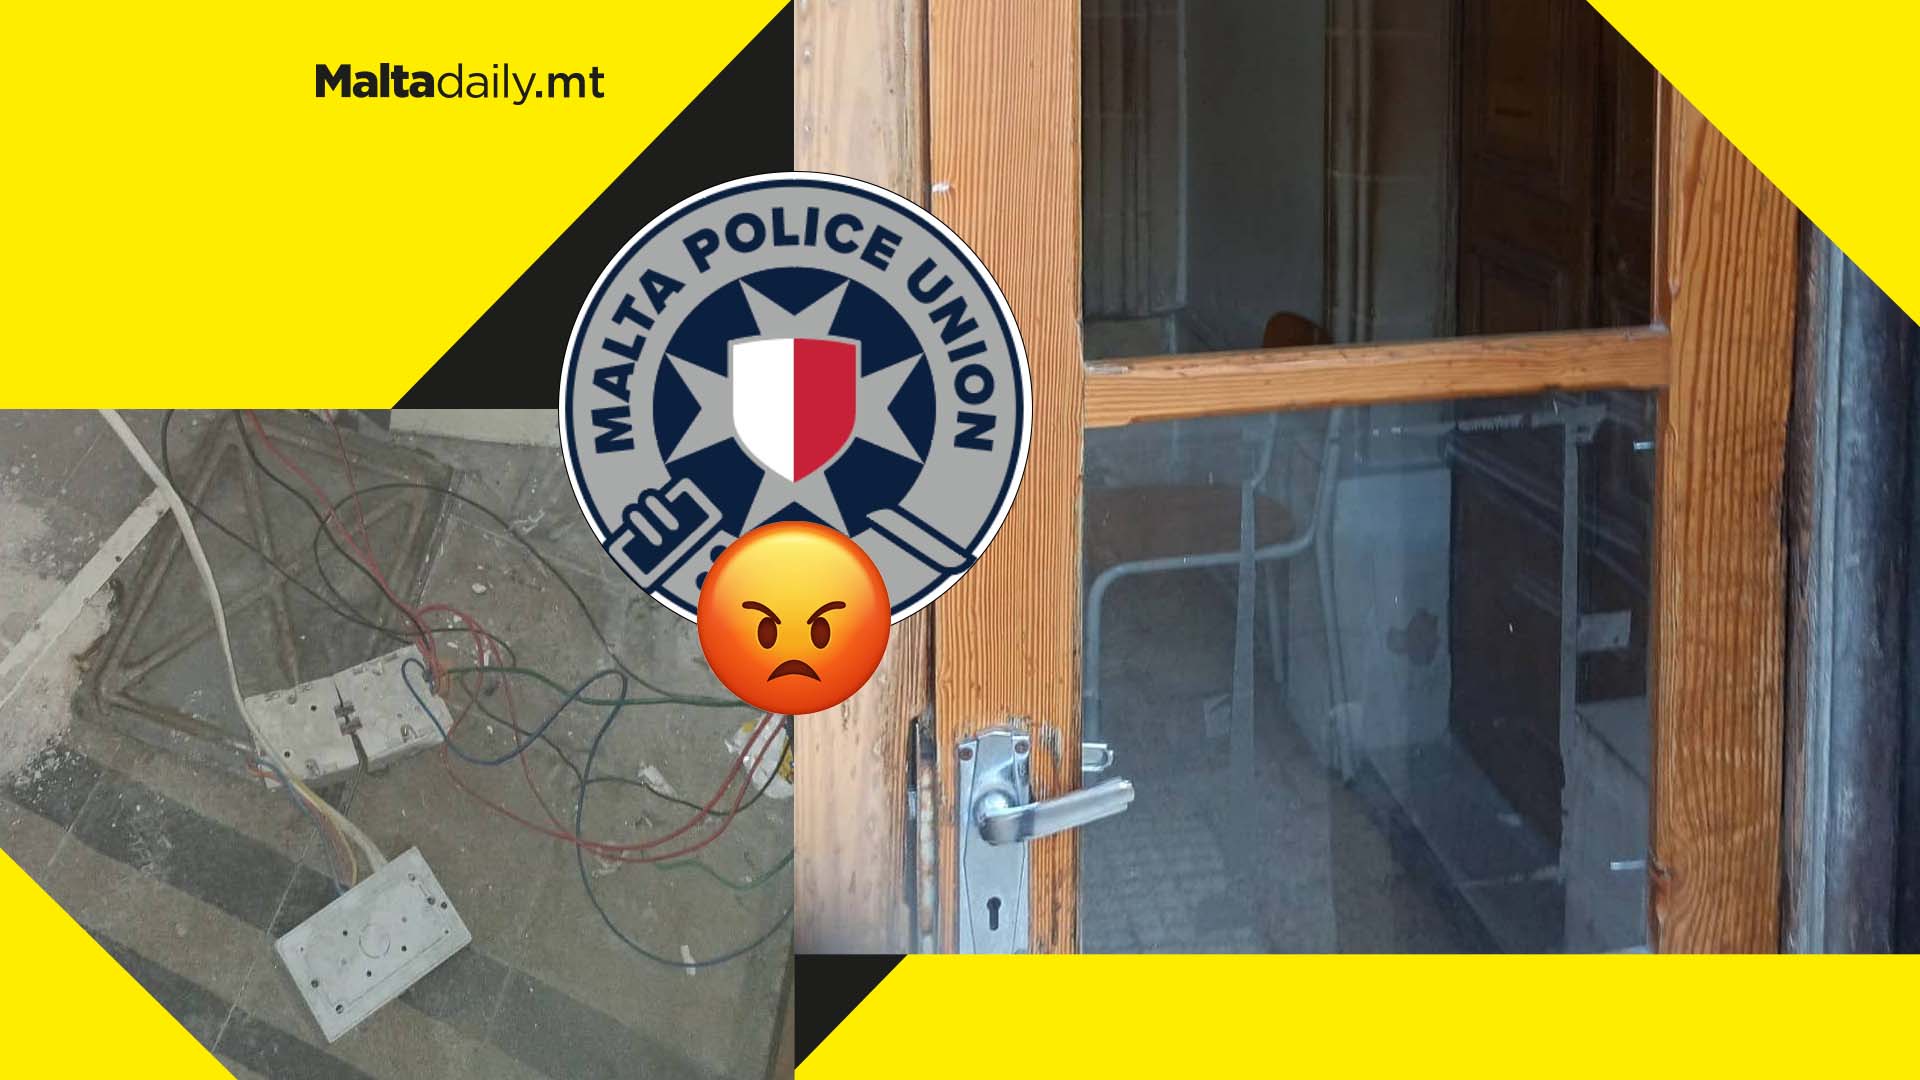 Union shares images of ‘substandard’ St Julian’s police station